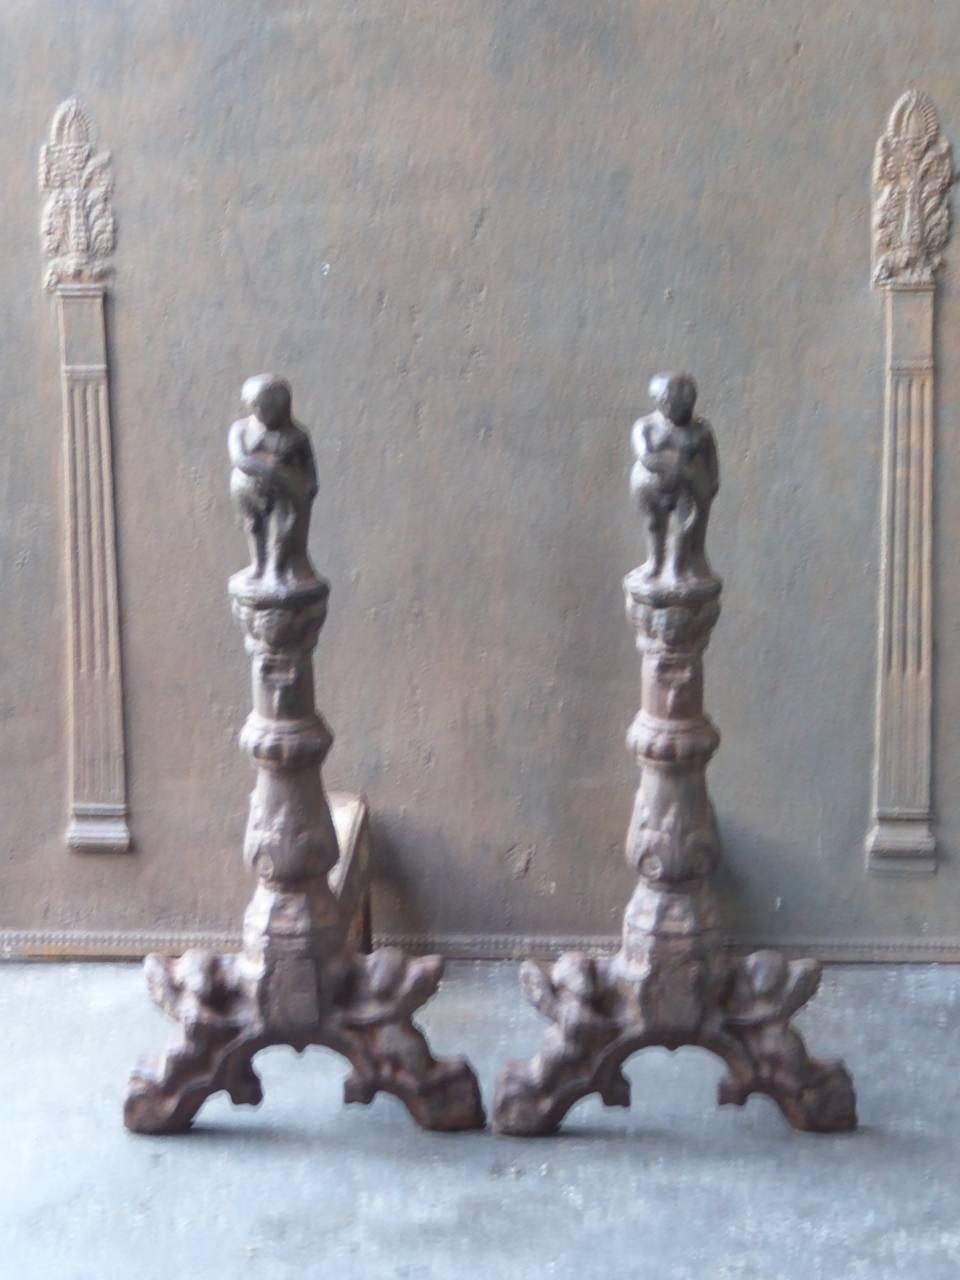 Very large and heavy 19th-20th century French cast iron fire dogs. The condition is good.

This product has to be shipped as freight due to its size and/or (volumetric) weight. You can contact us to find out the daily rate for a freight shipment of